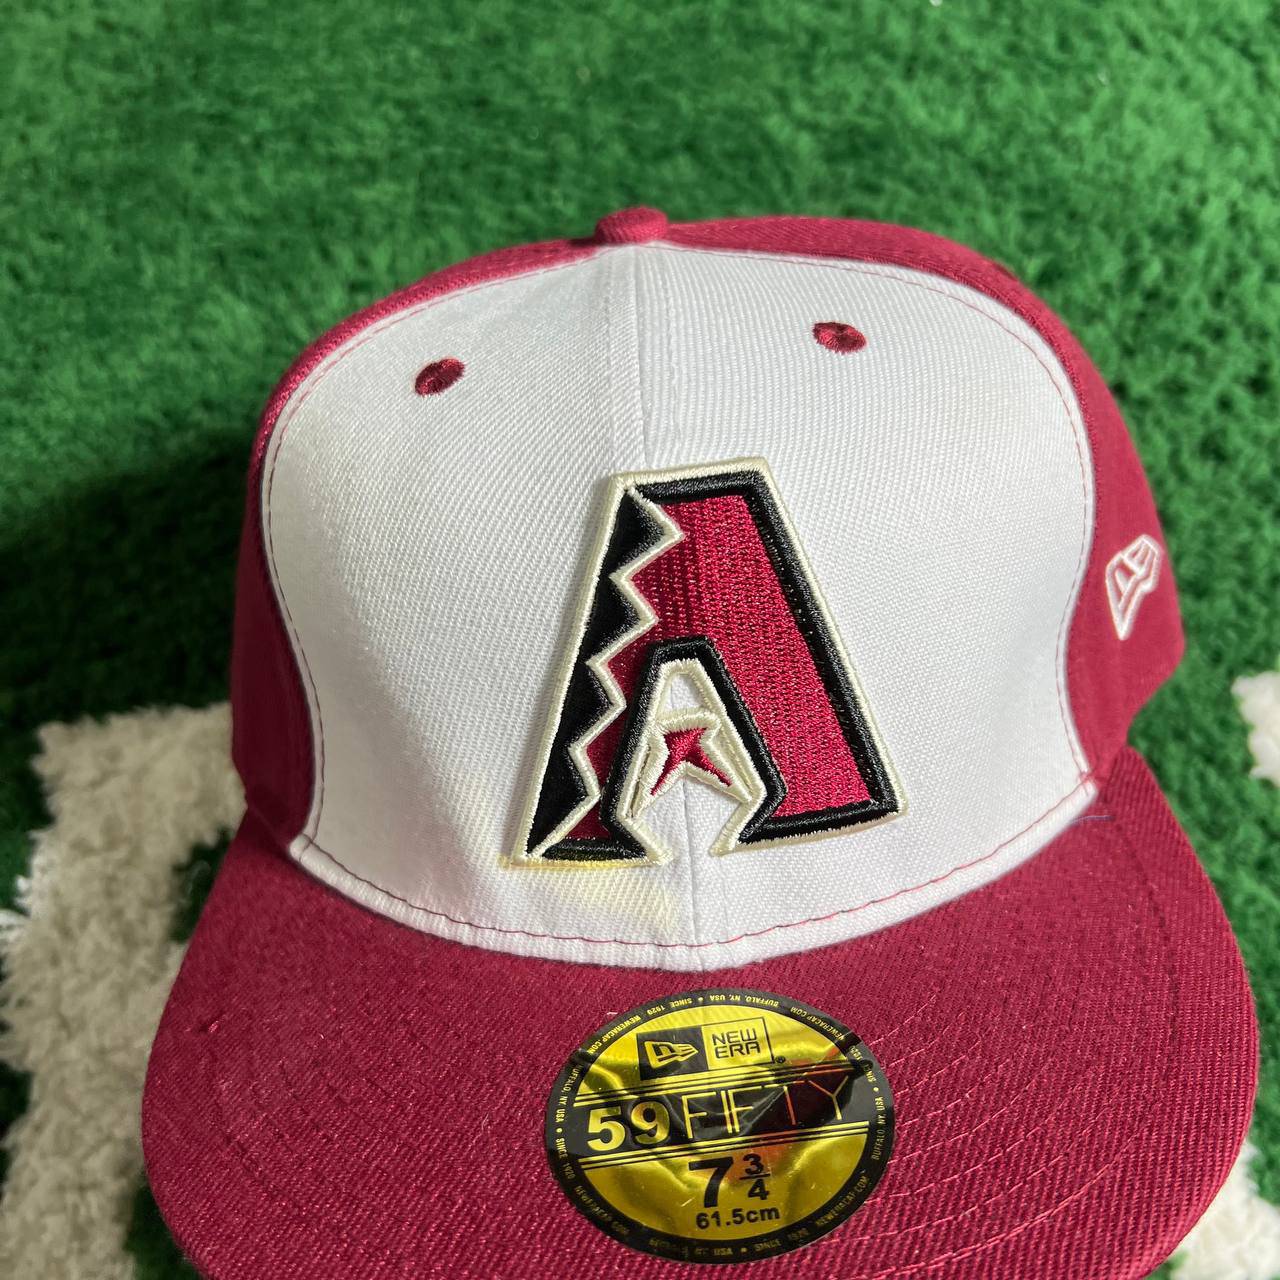 New Era 59FIFTY Diamondbacks Cap - Sophistication in Red and White